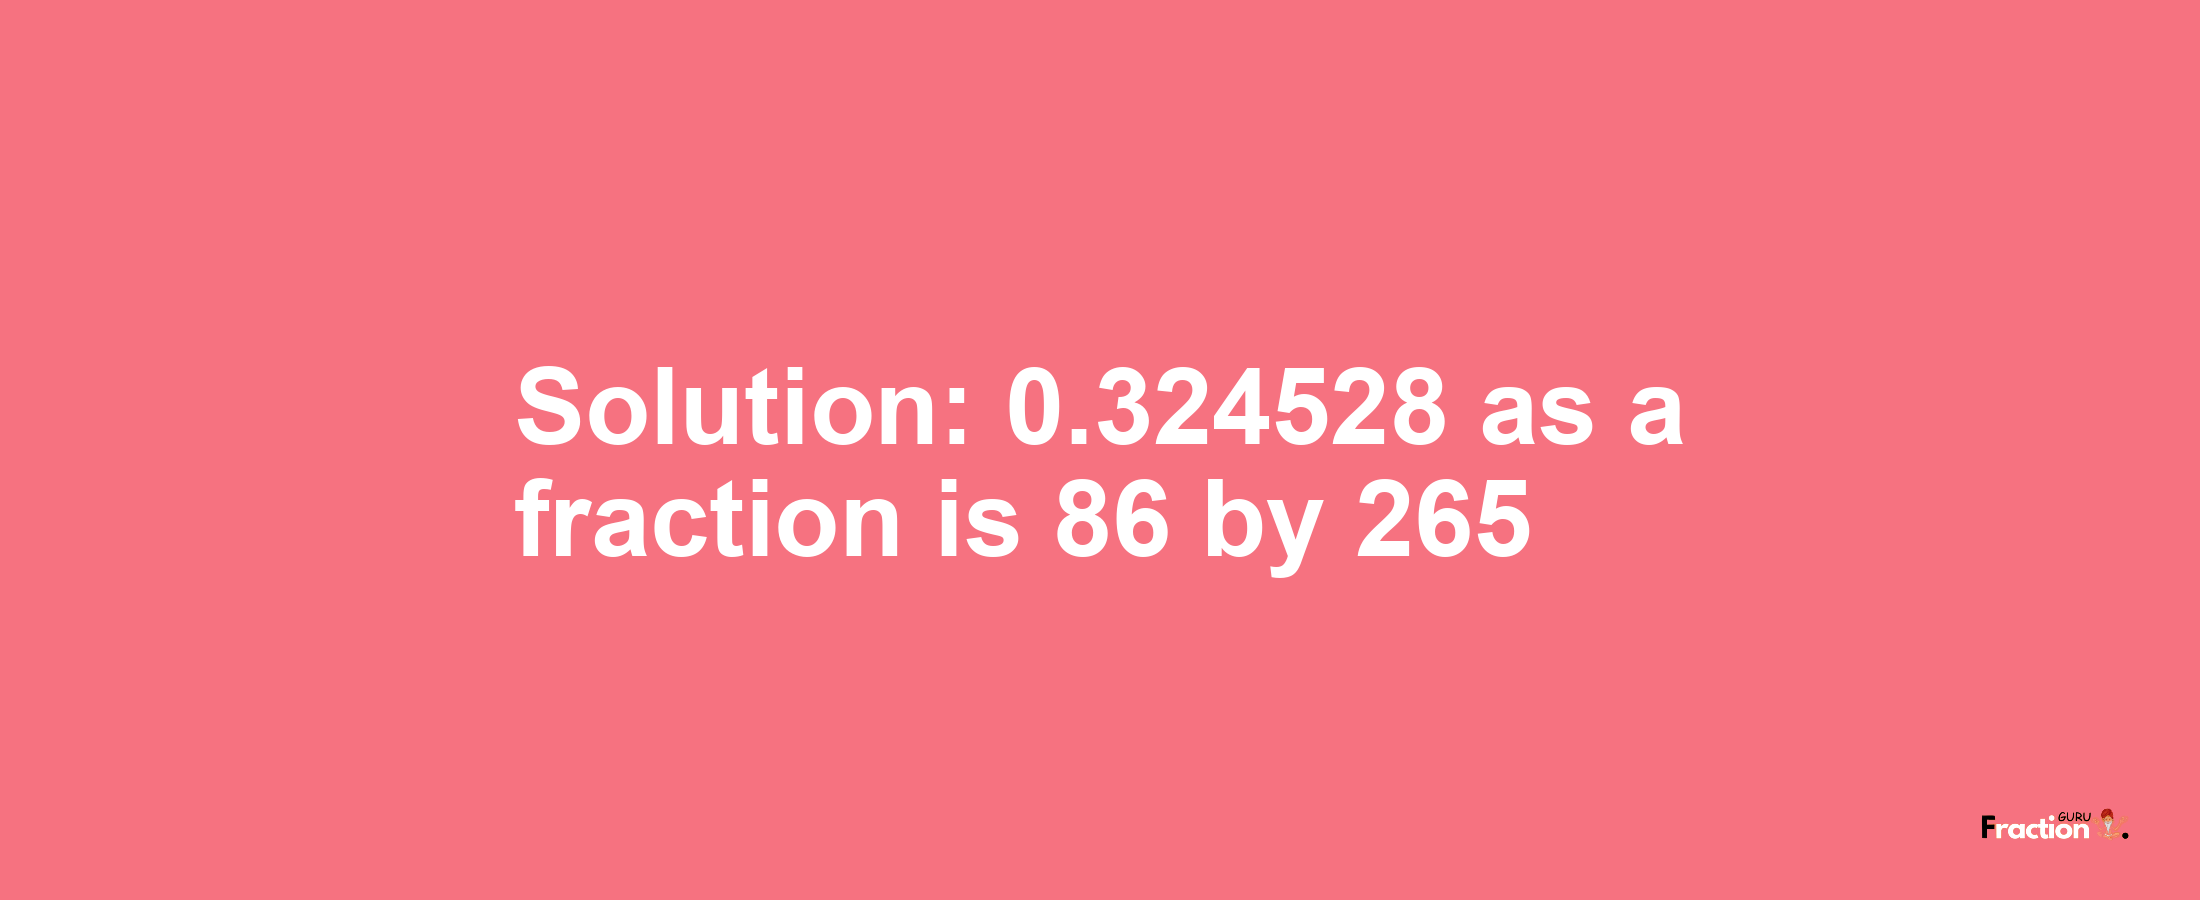 Solution:0.324528 as a fraction is 86/265